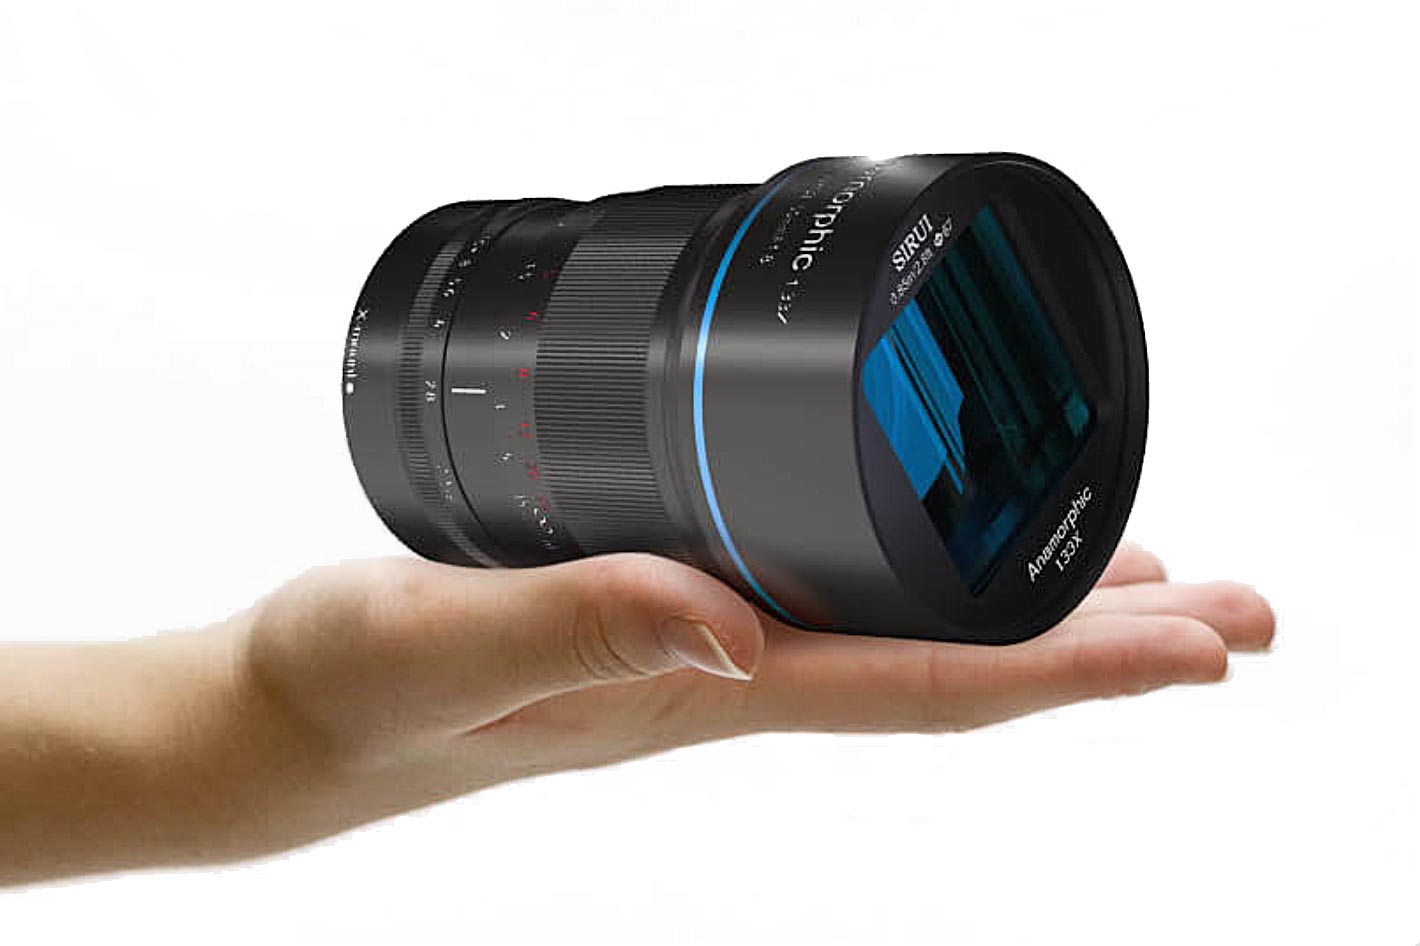 Sirui 24mm f/2.8 1.33x anamorphic lens for five different mounts